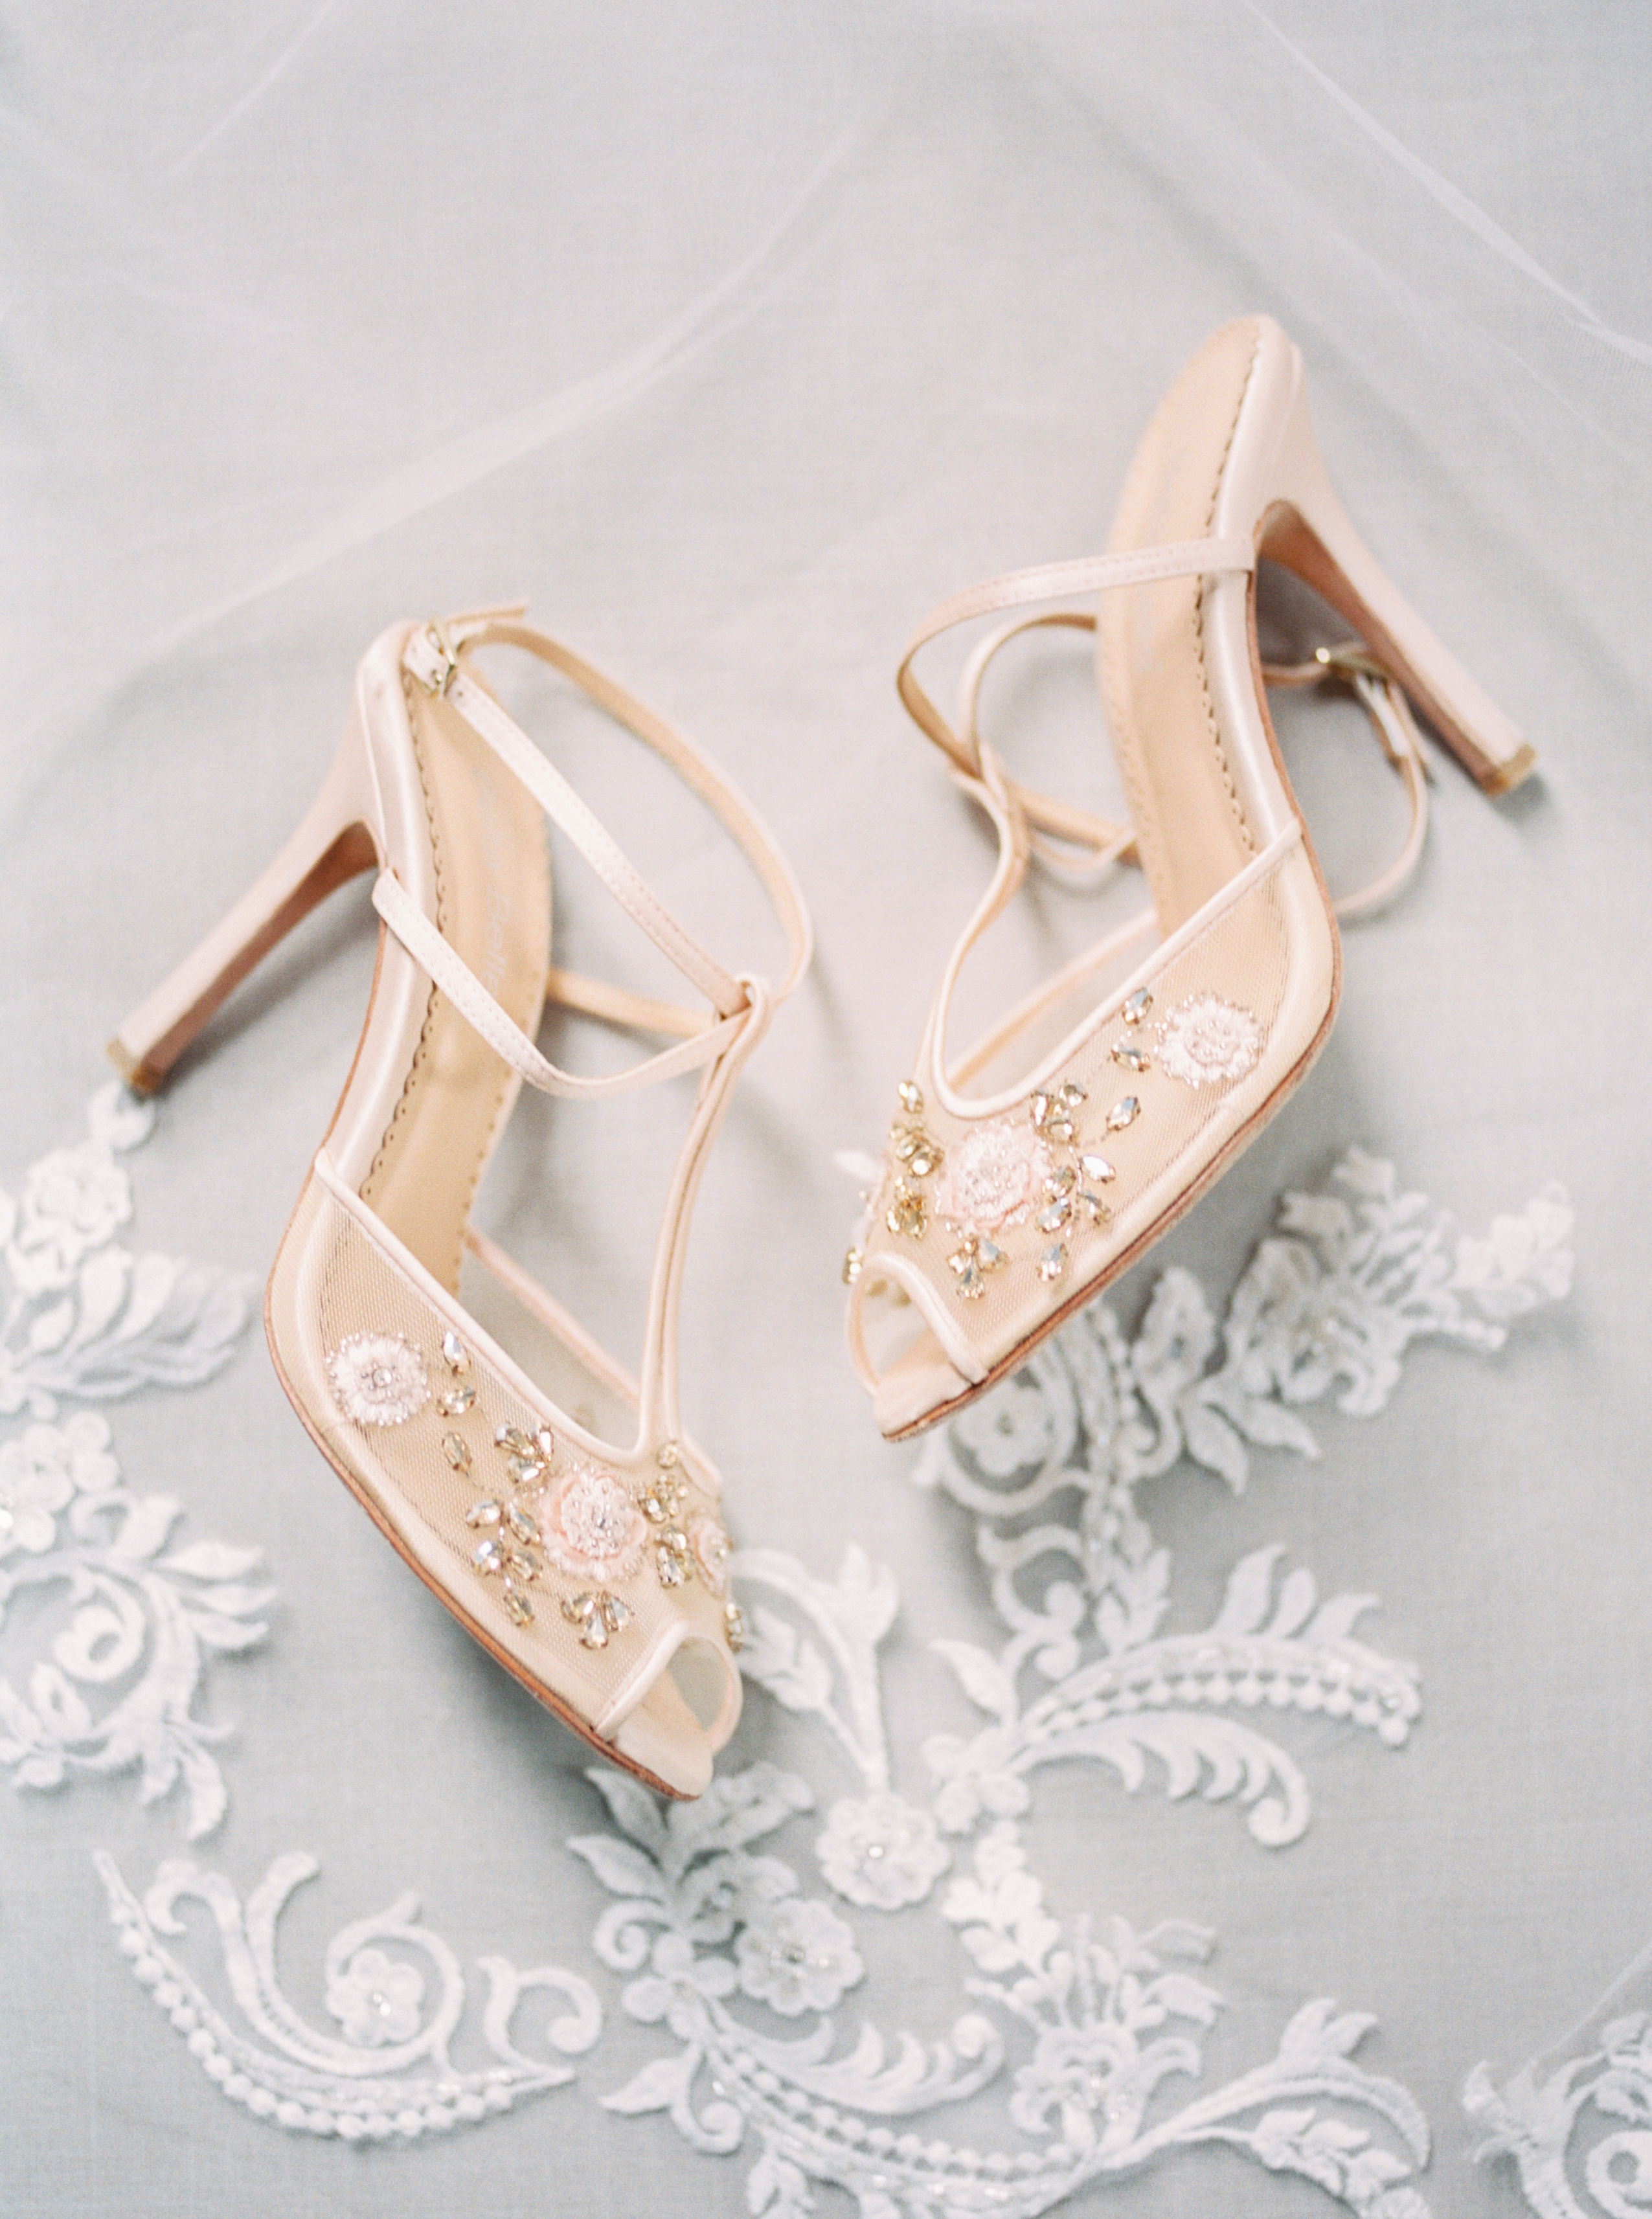 Heirloom bridal shoes at Greensboro, NC venue McAlister-Leftwich House